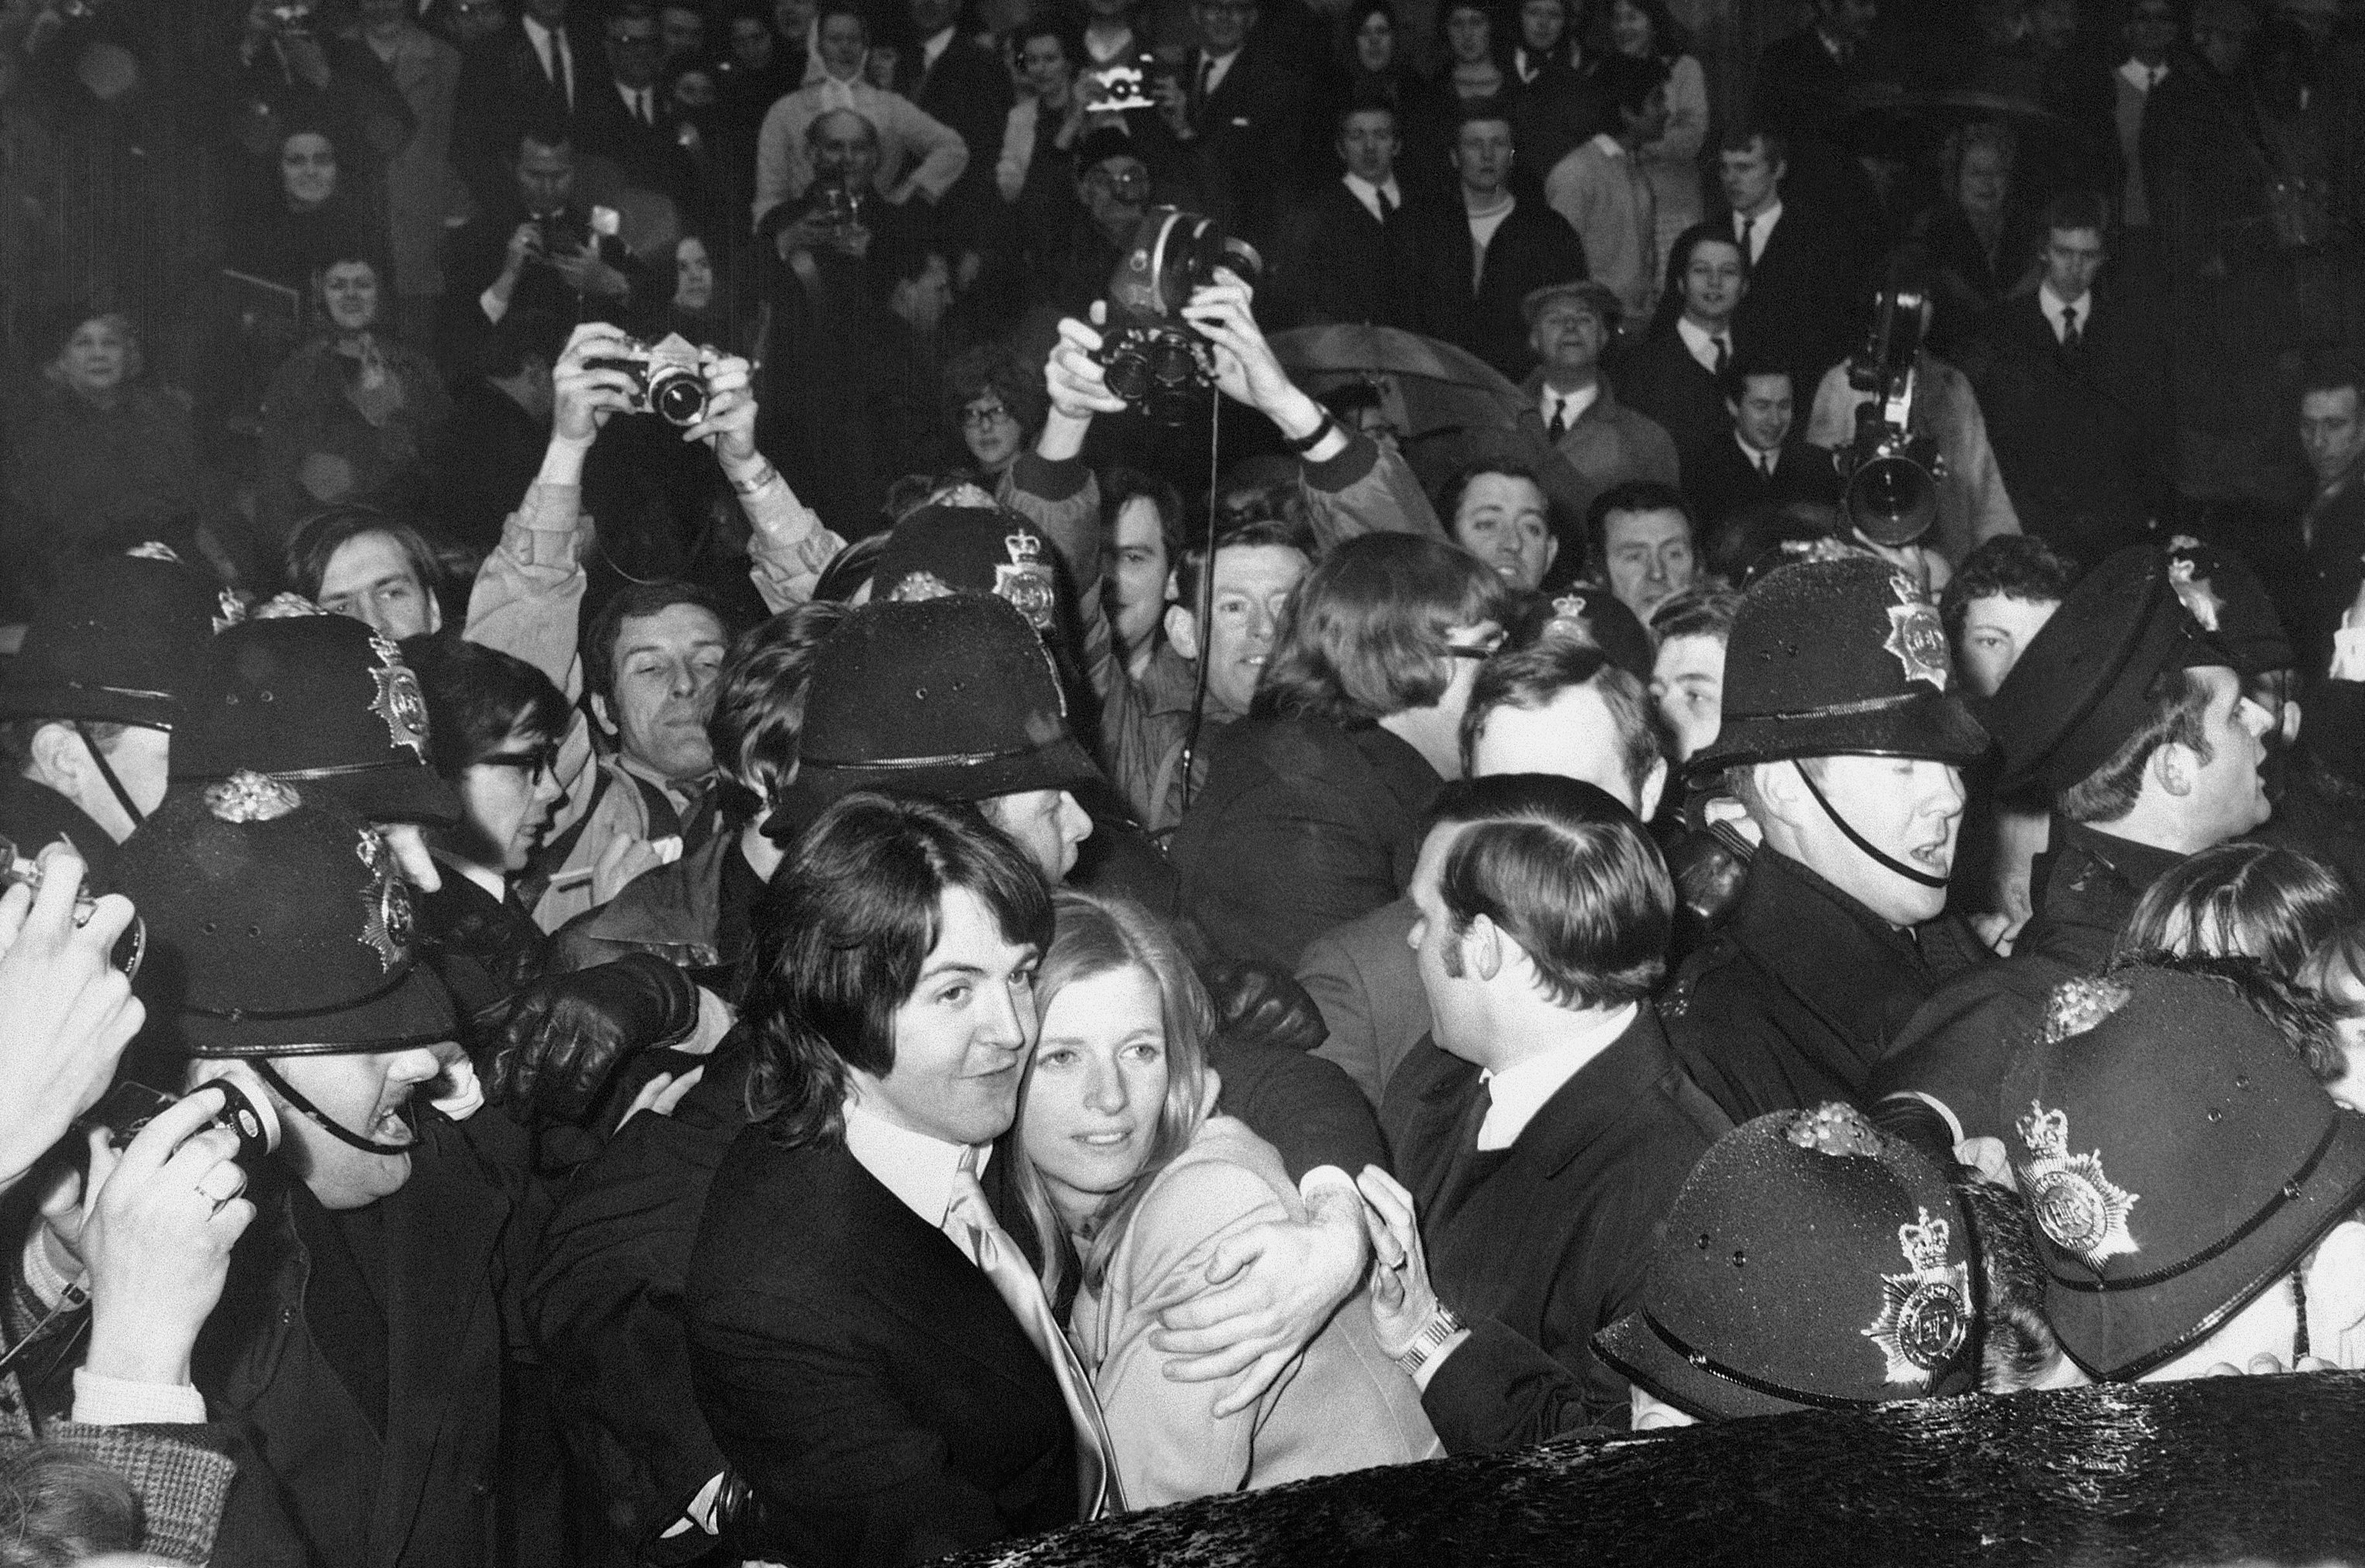 Police officers surrounding Paul McCartney and new wife Linda McCartney as they make their way through fans following their marriage in London | Source: Getty Images